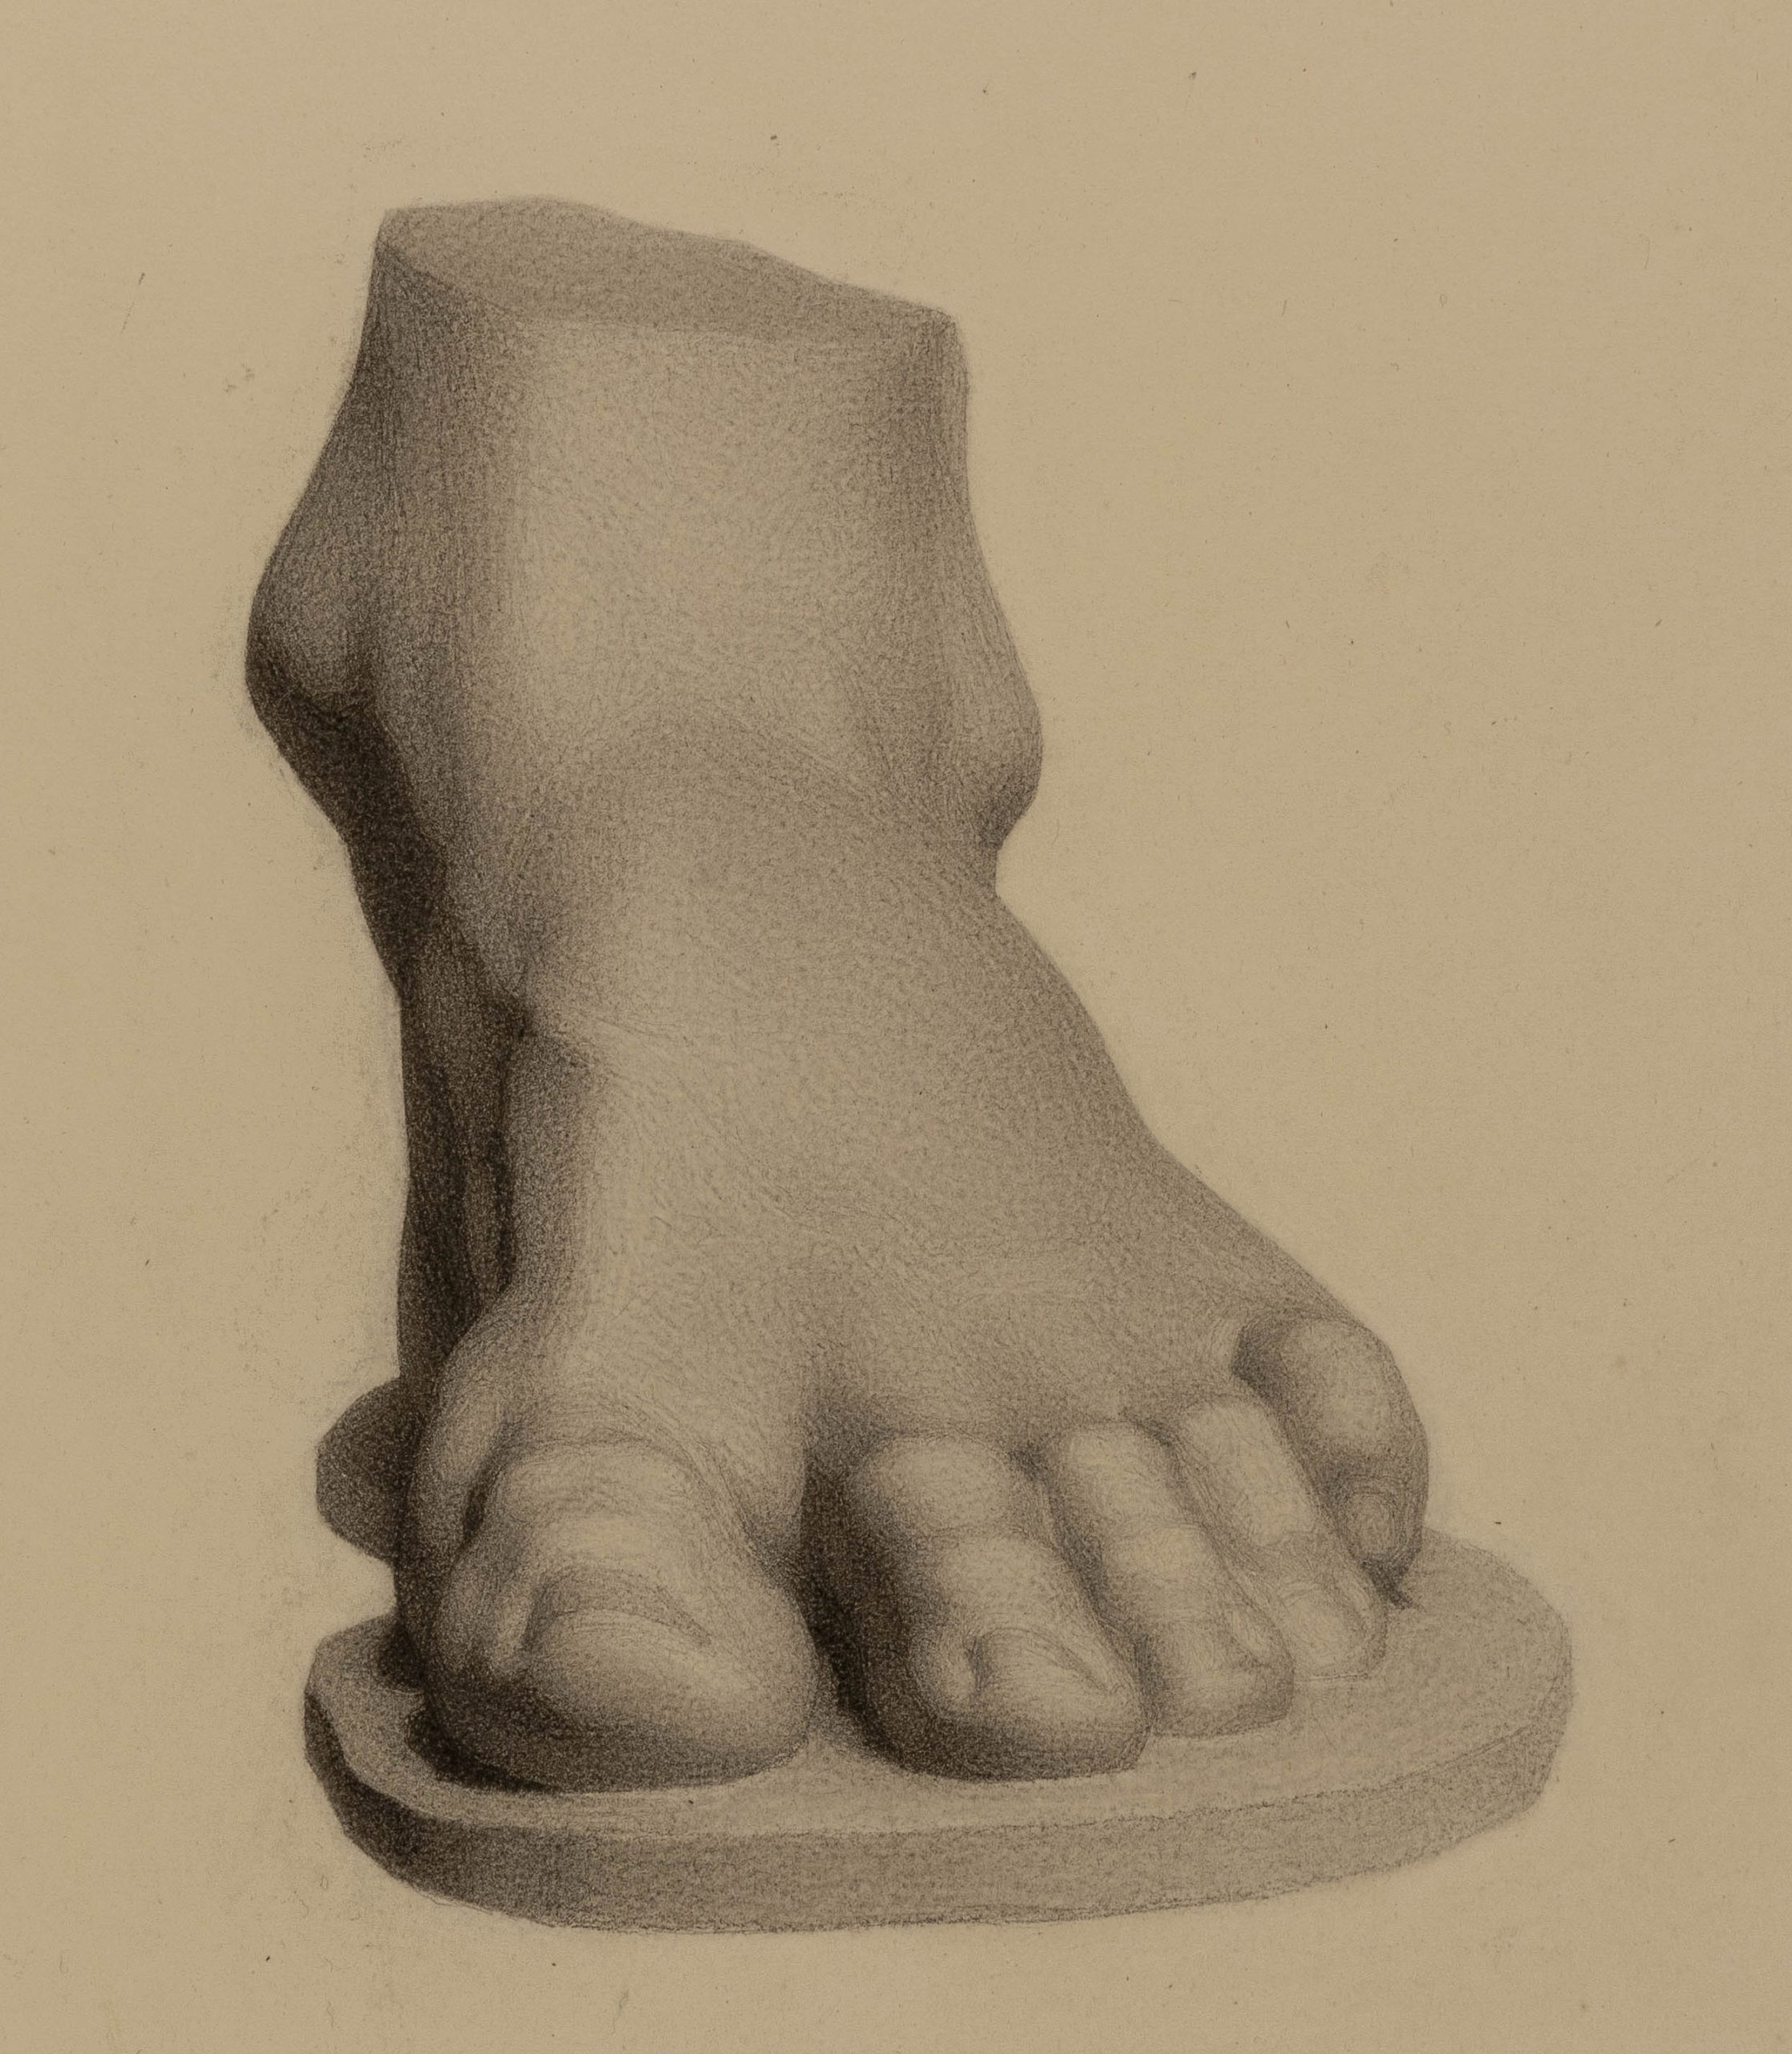 Study of a plaster cast of a foot